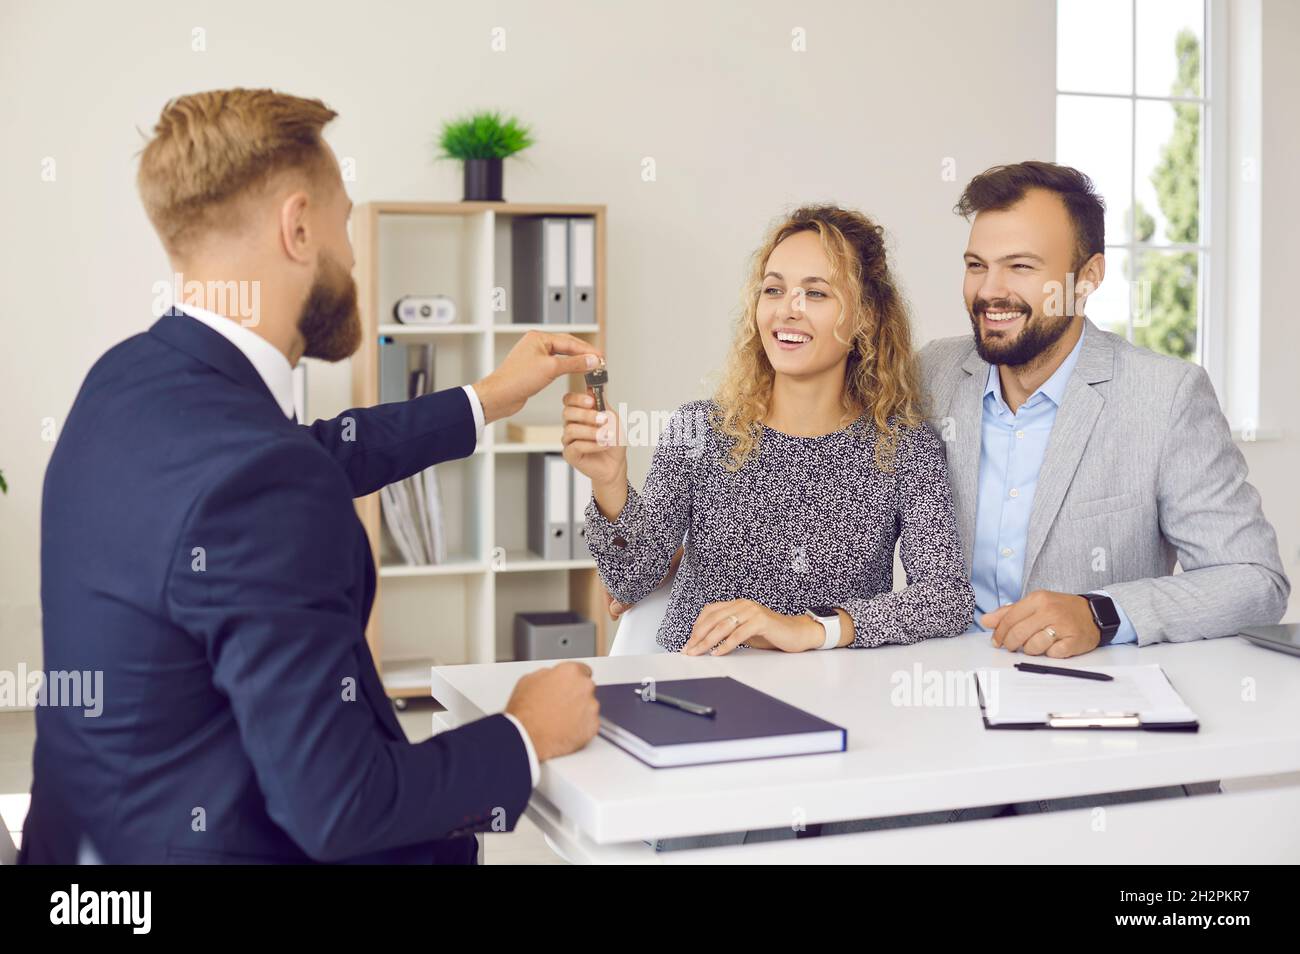 Real estate agent hands over keys to his new home to excited married couple at meeting in office. Stock Photo